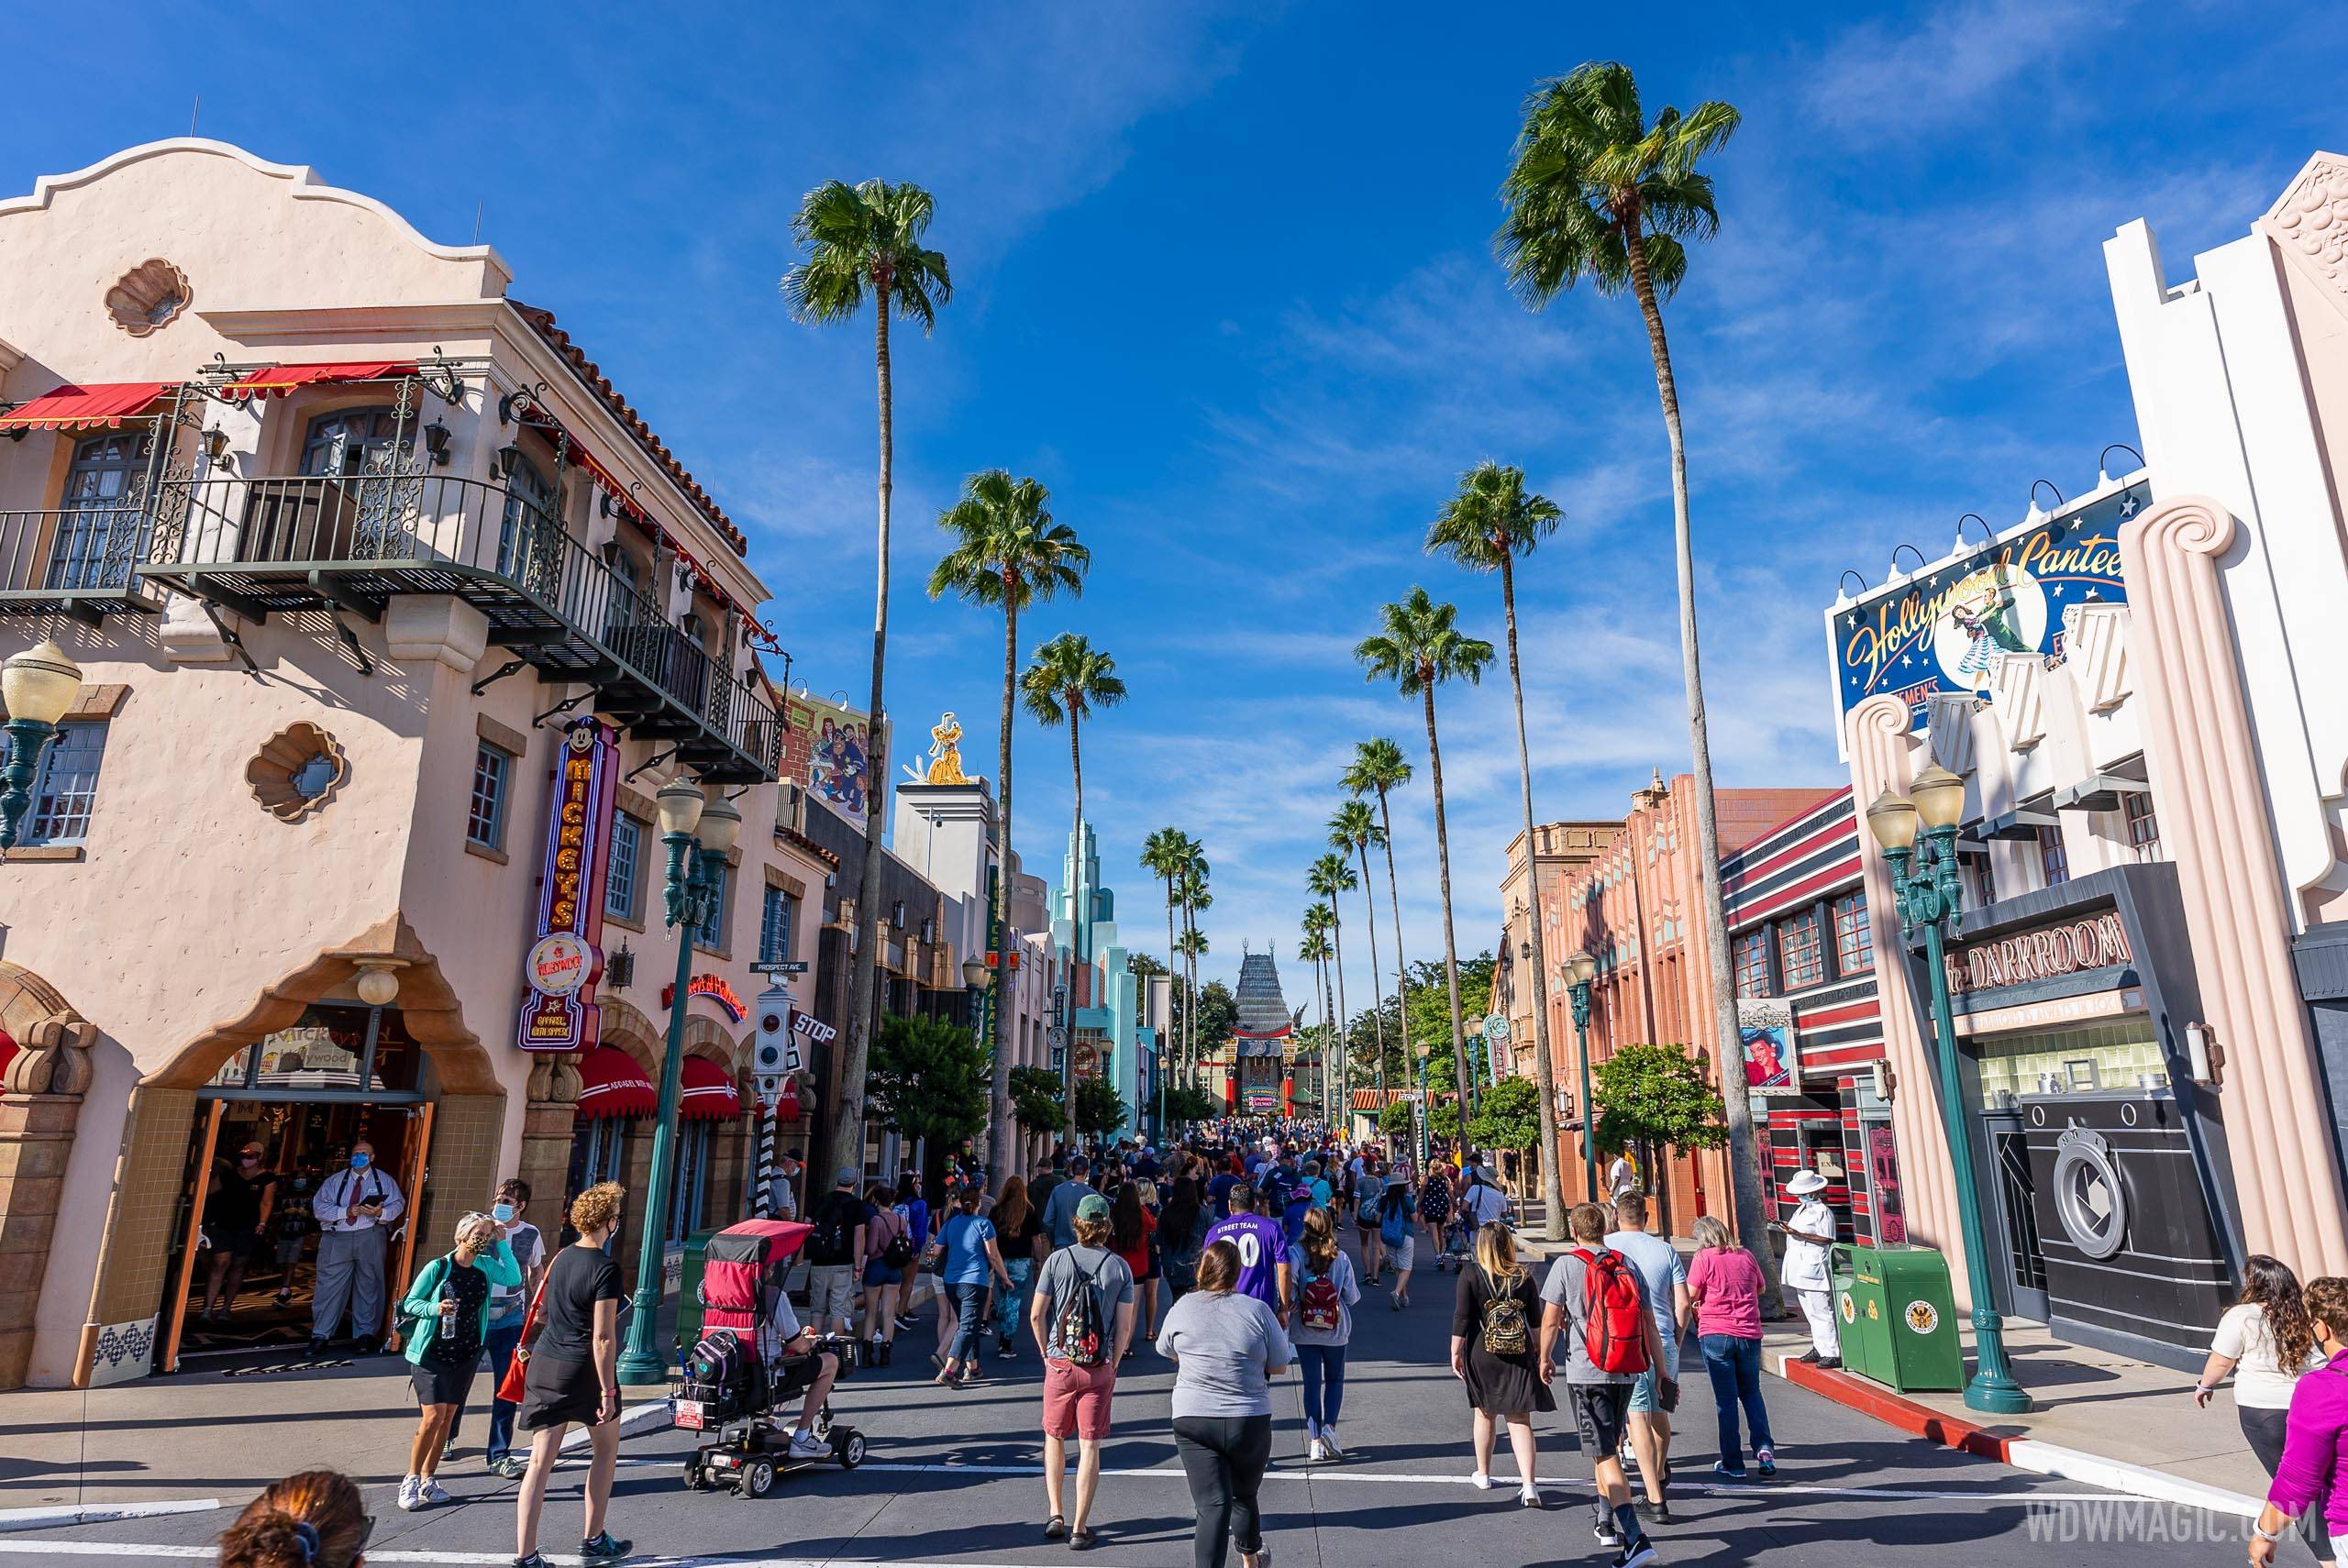 Walt Disney World theme parks have been noticeably busier in recent times